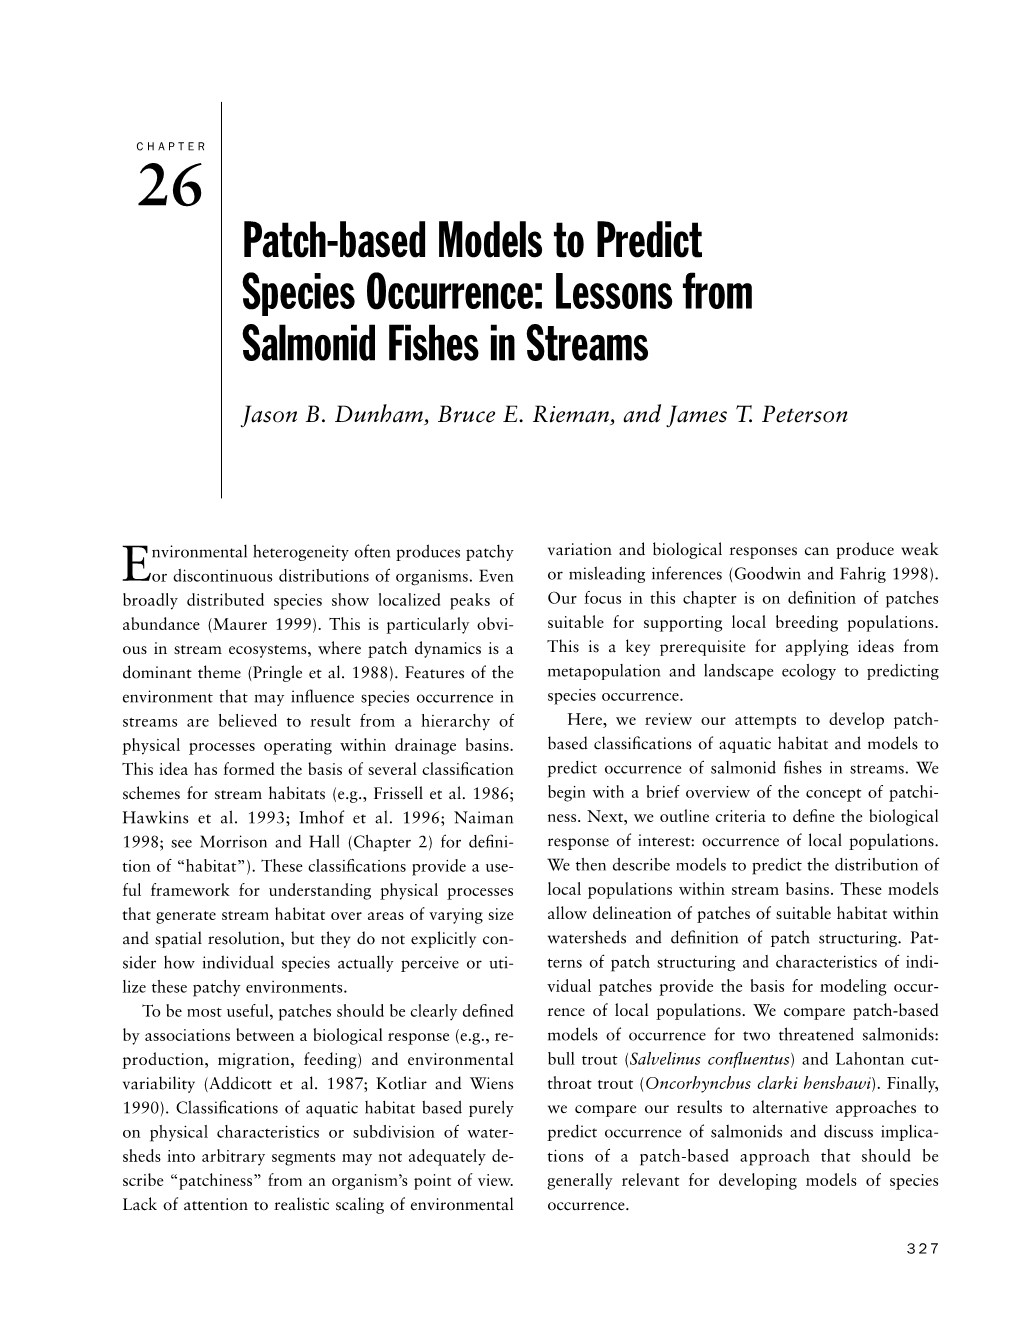 Patch-Based Models to Predict Species Occurrence: Lessons from Salmonid Fishes in Streams